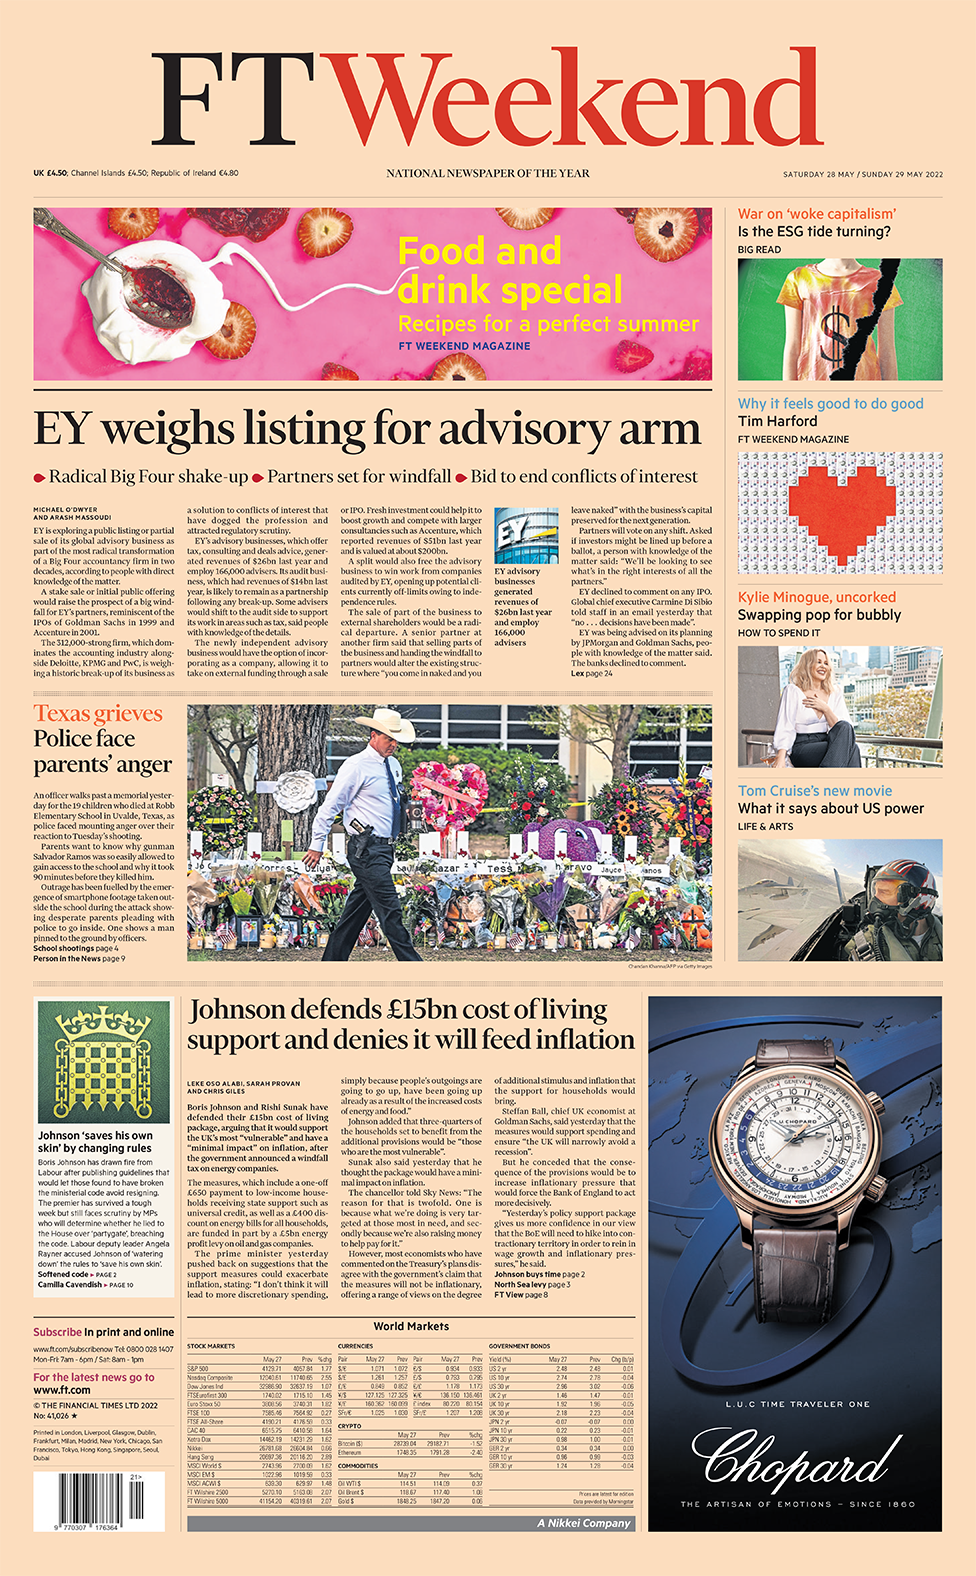 The headline in the Financial Times reads: "EY weighs listing for advisory arm"